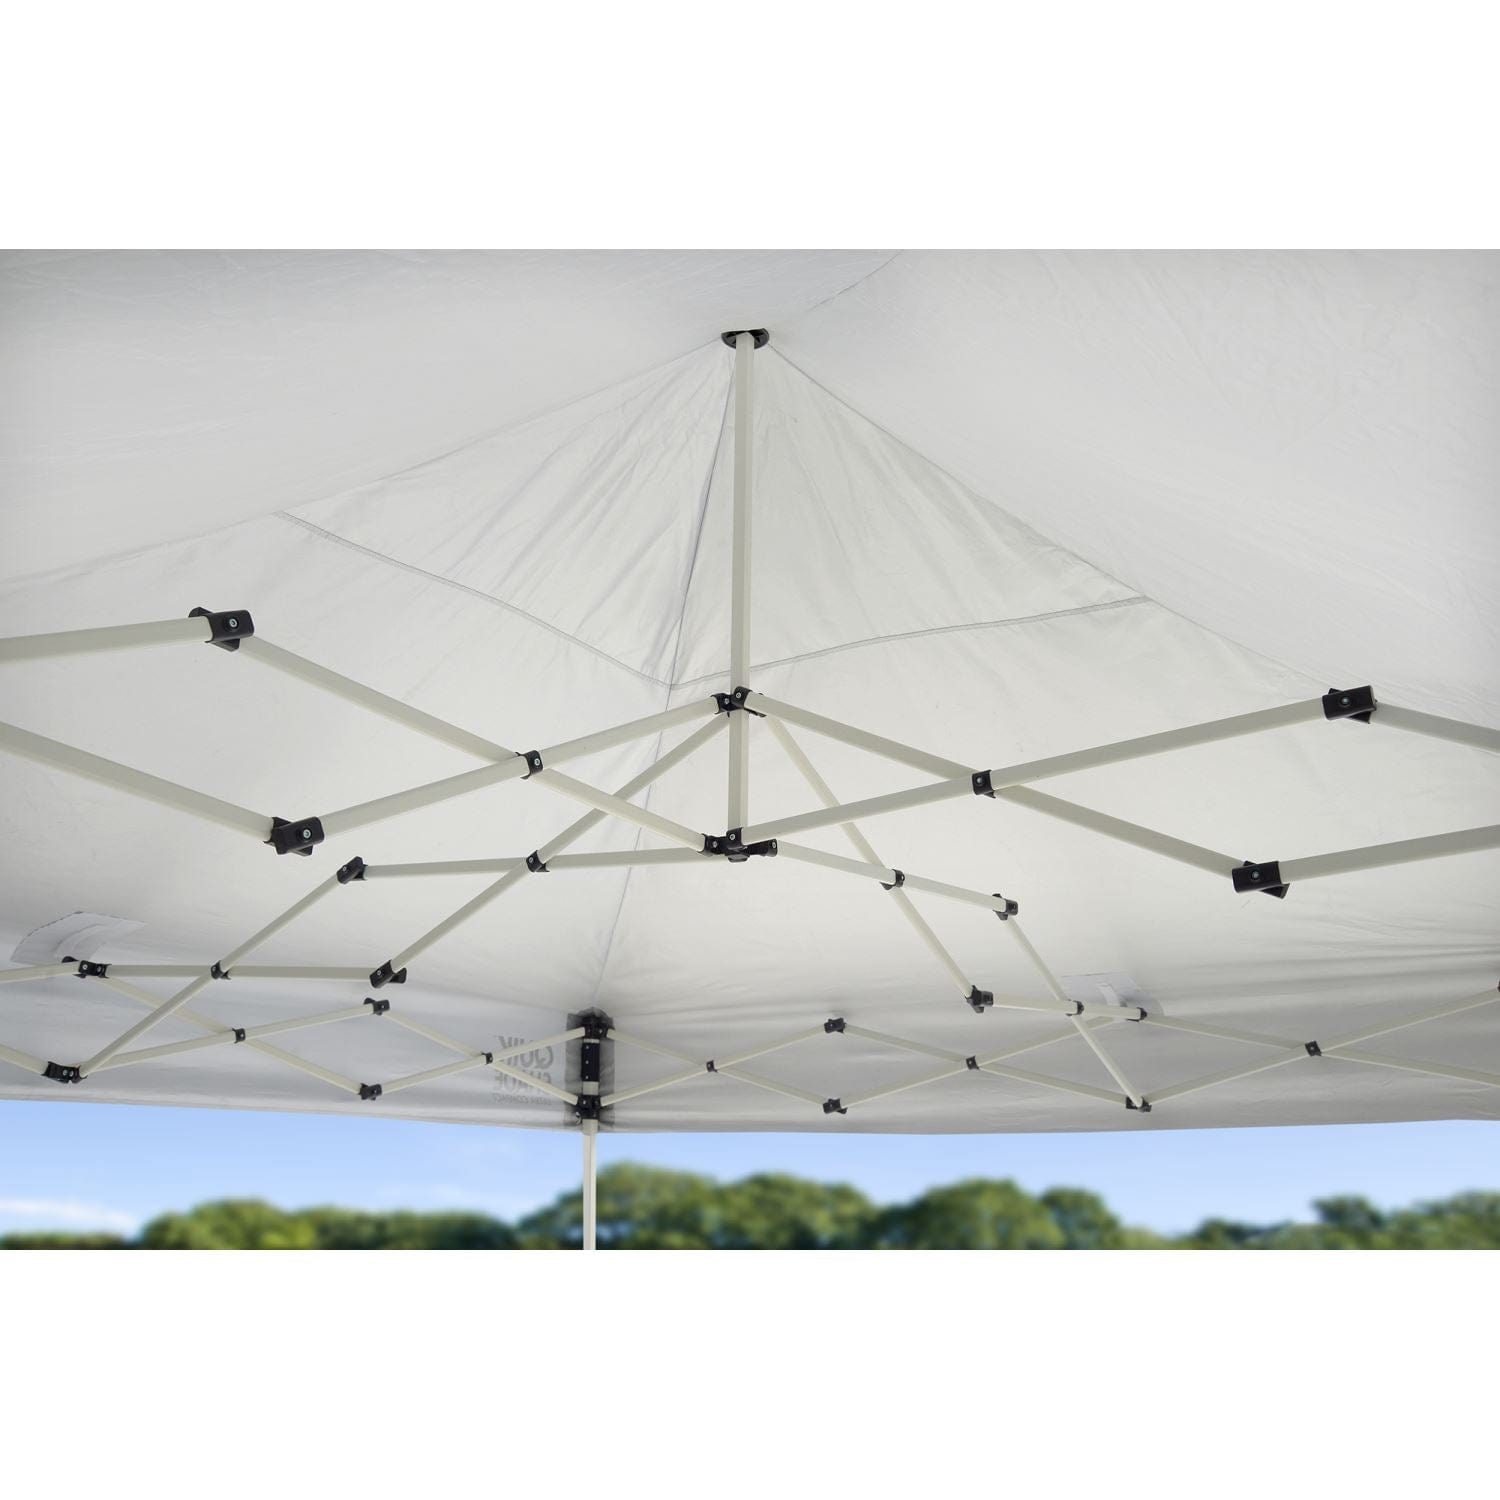 The Fulfiller Pop Up Canopies Quik Shade | Marketplace MP100 Ultra Compact 10 x 10 ft. Straight Leg Canopy - White 162585DS